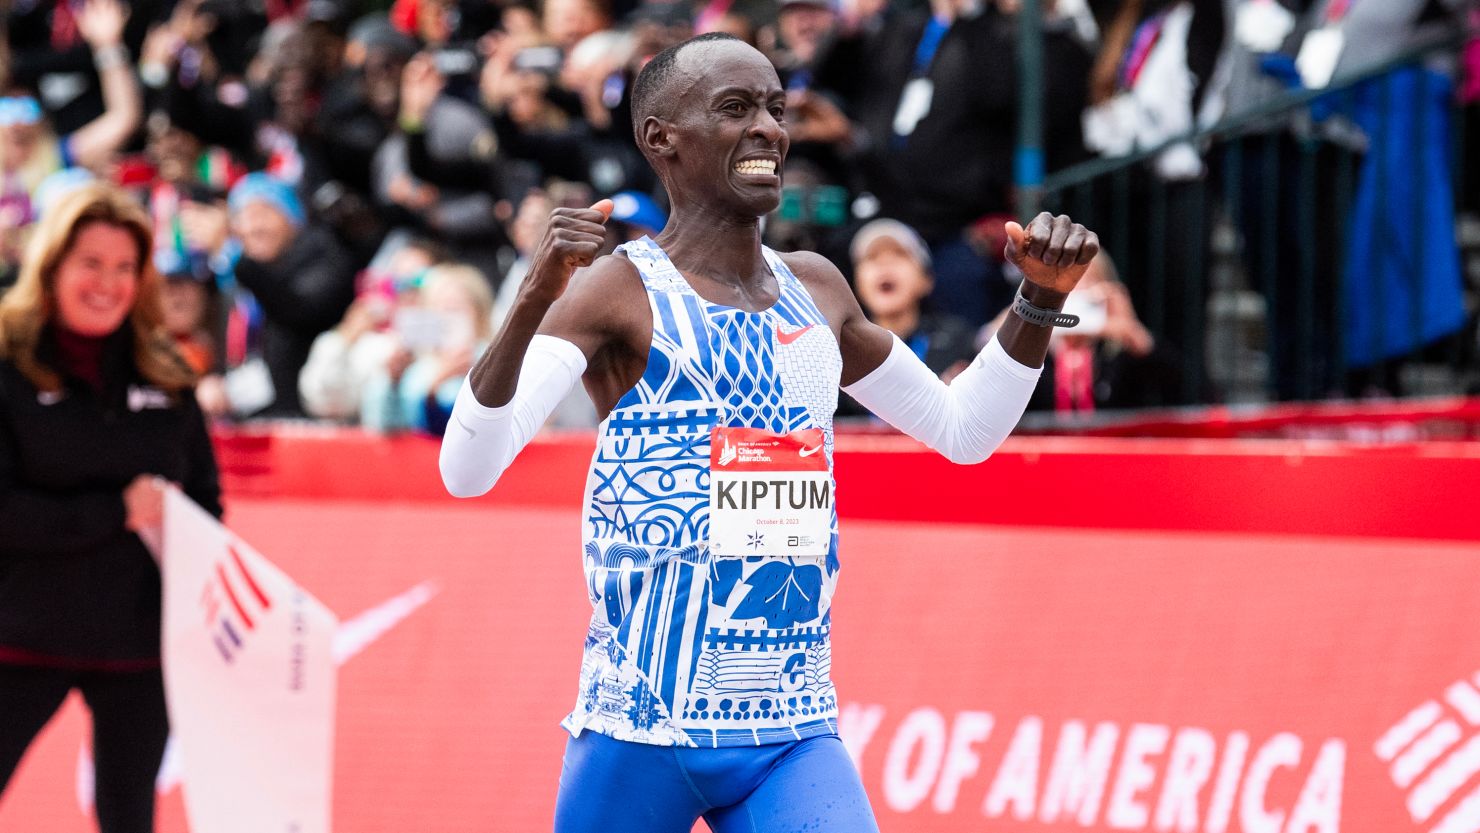 Oct 8, 2023; Chicago, IL, USA; Kelvin Kiptum (KEN) celebrates after finishing in a world record time of 2:00:35 to win the Chicago Marathon at Grant Park. Mandatory Credit: Patrick Gorski-USA TODAY Sports